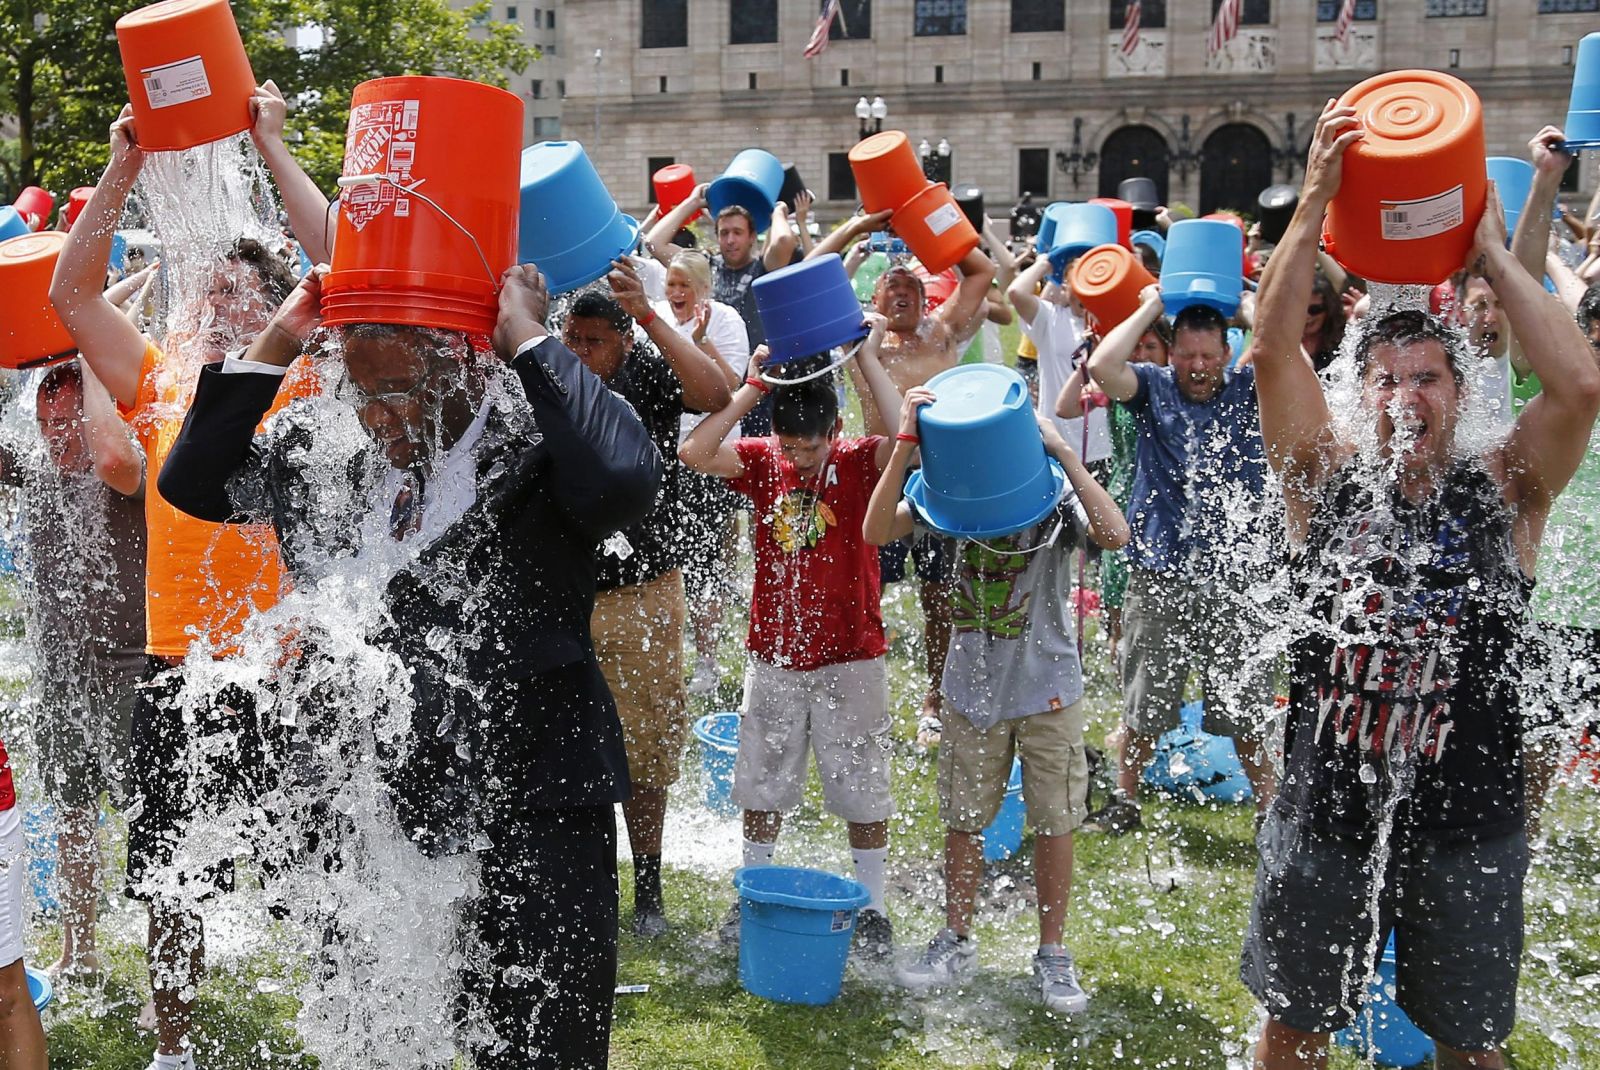 File Photo: A group performing the ALS Ice Bucket Challenge